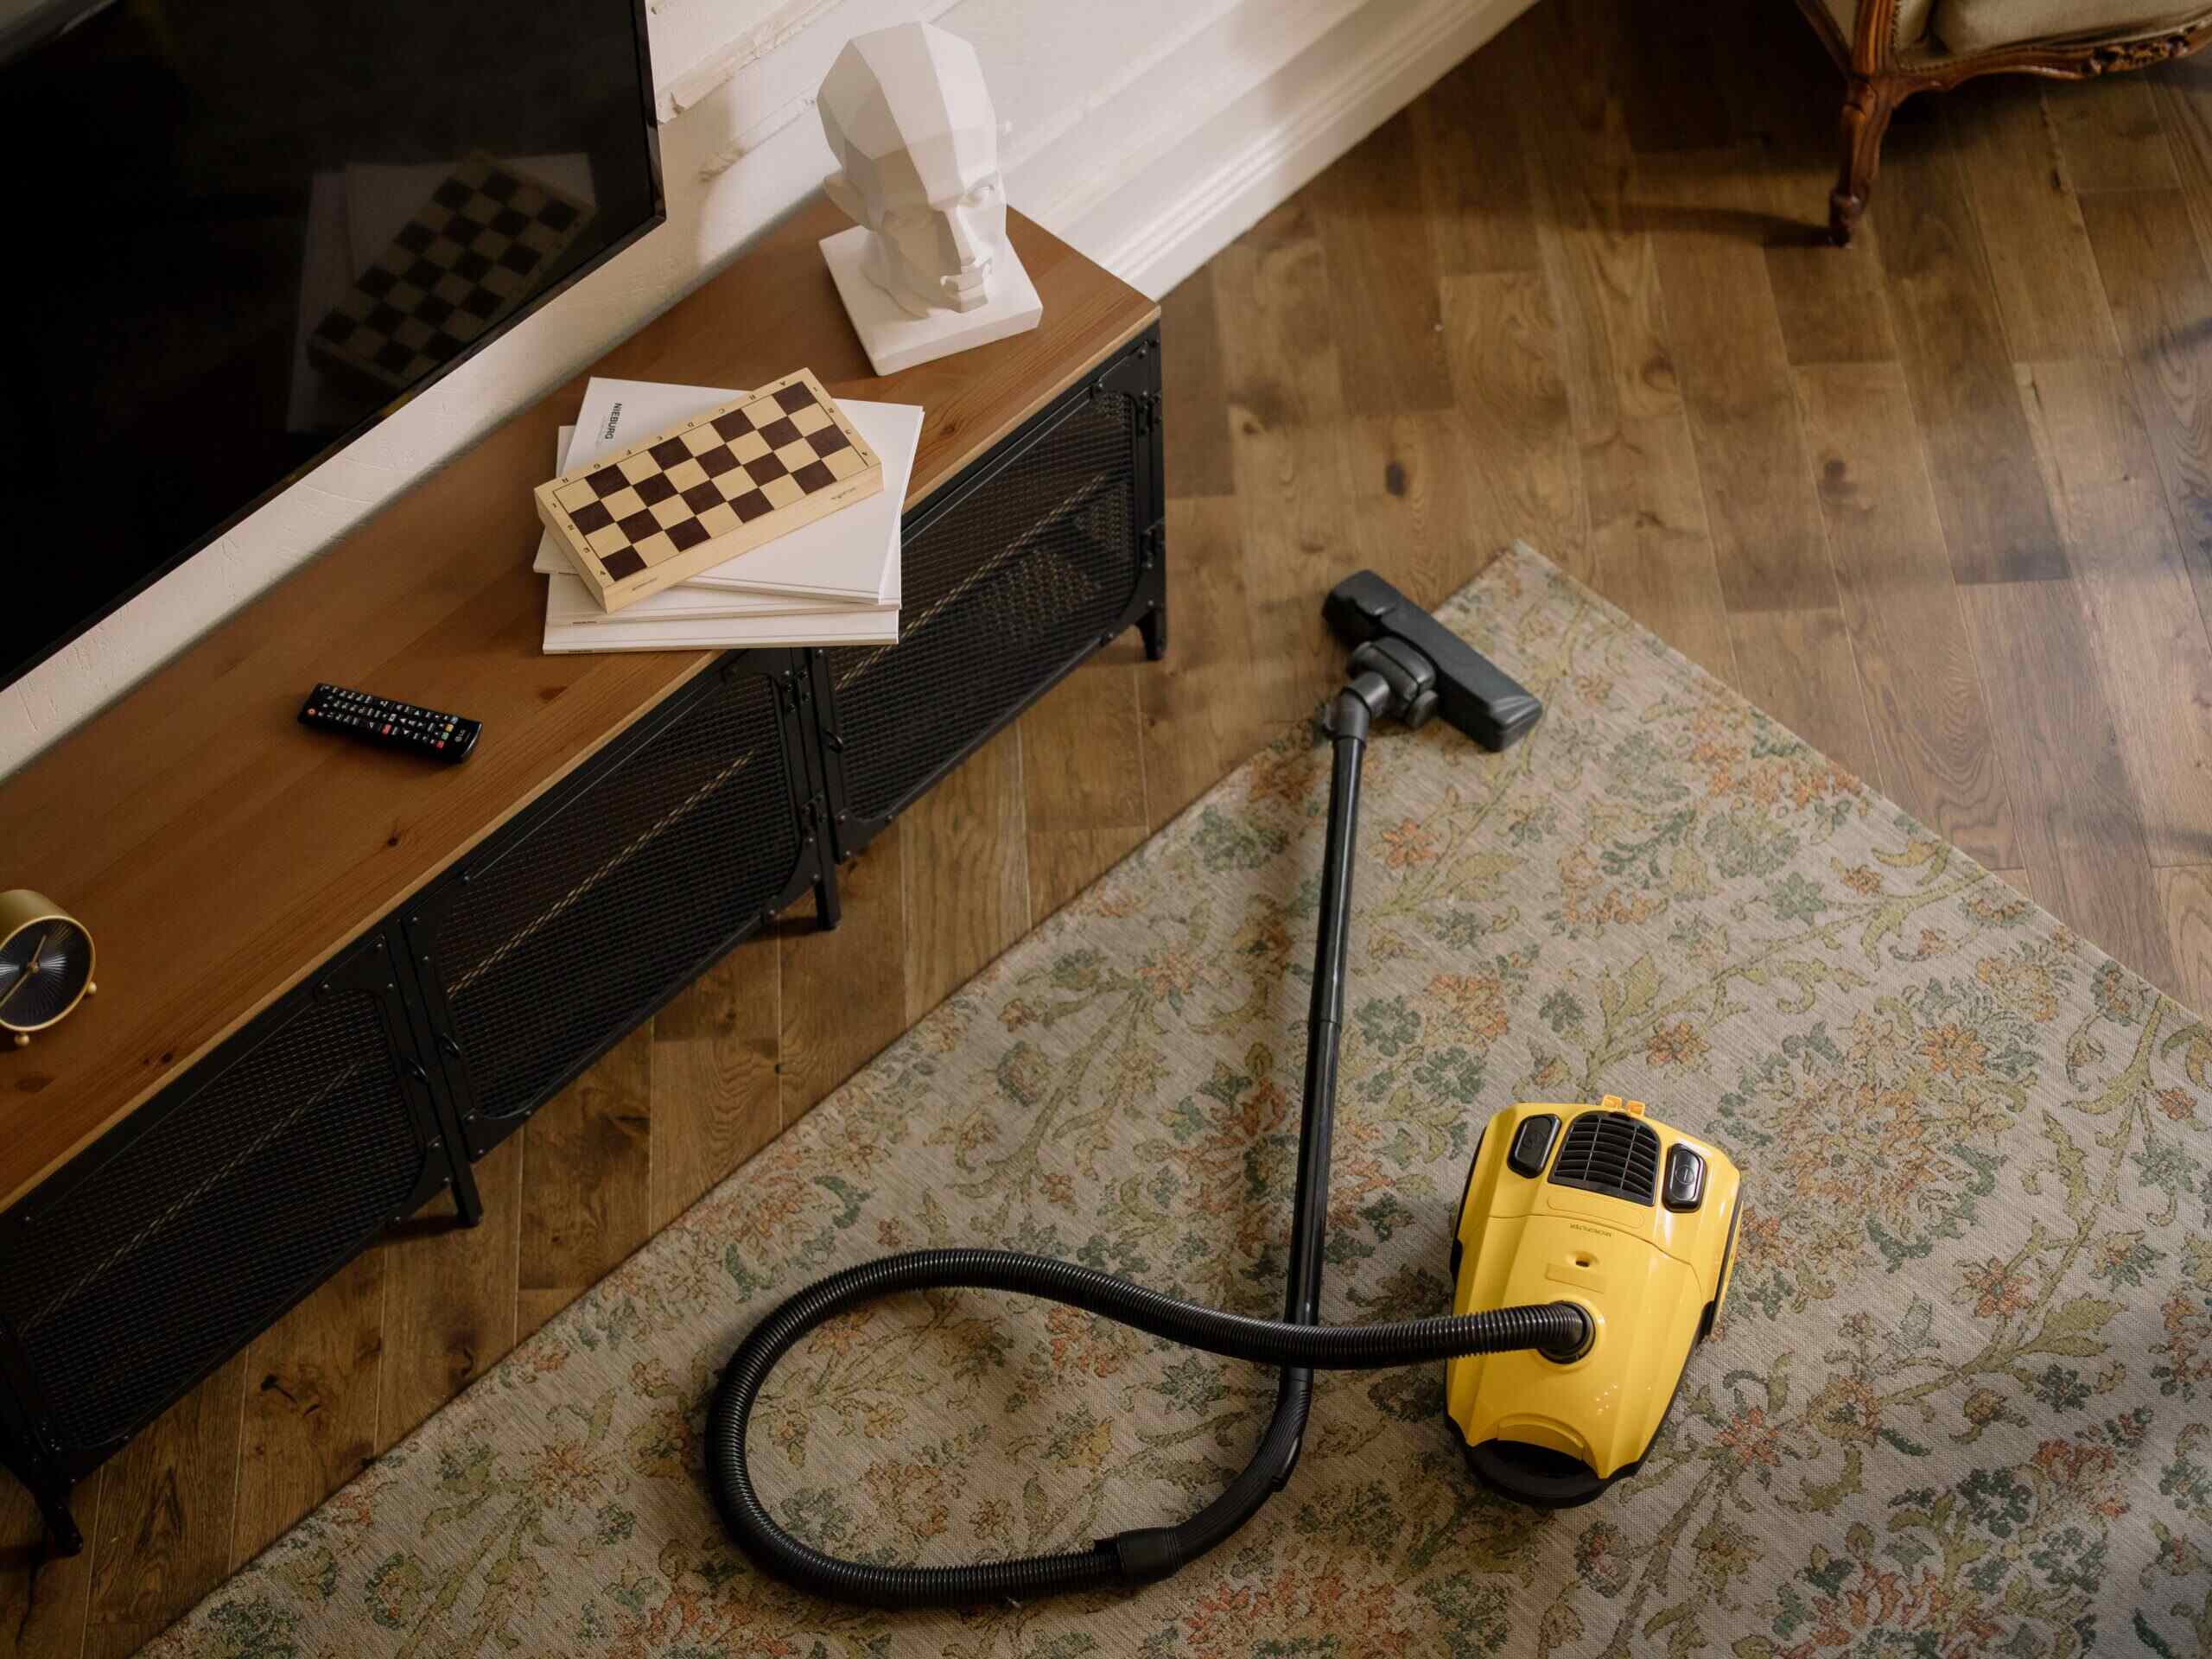 How To Use And Maintain The Vacuum Cleaner